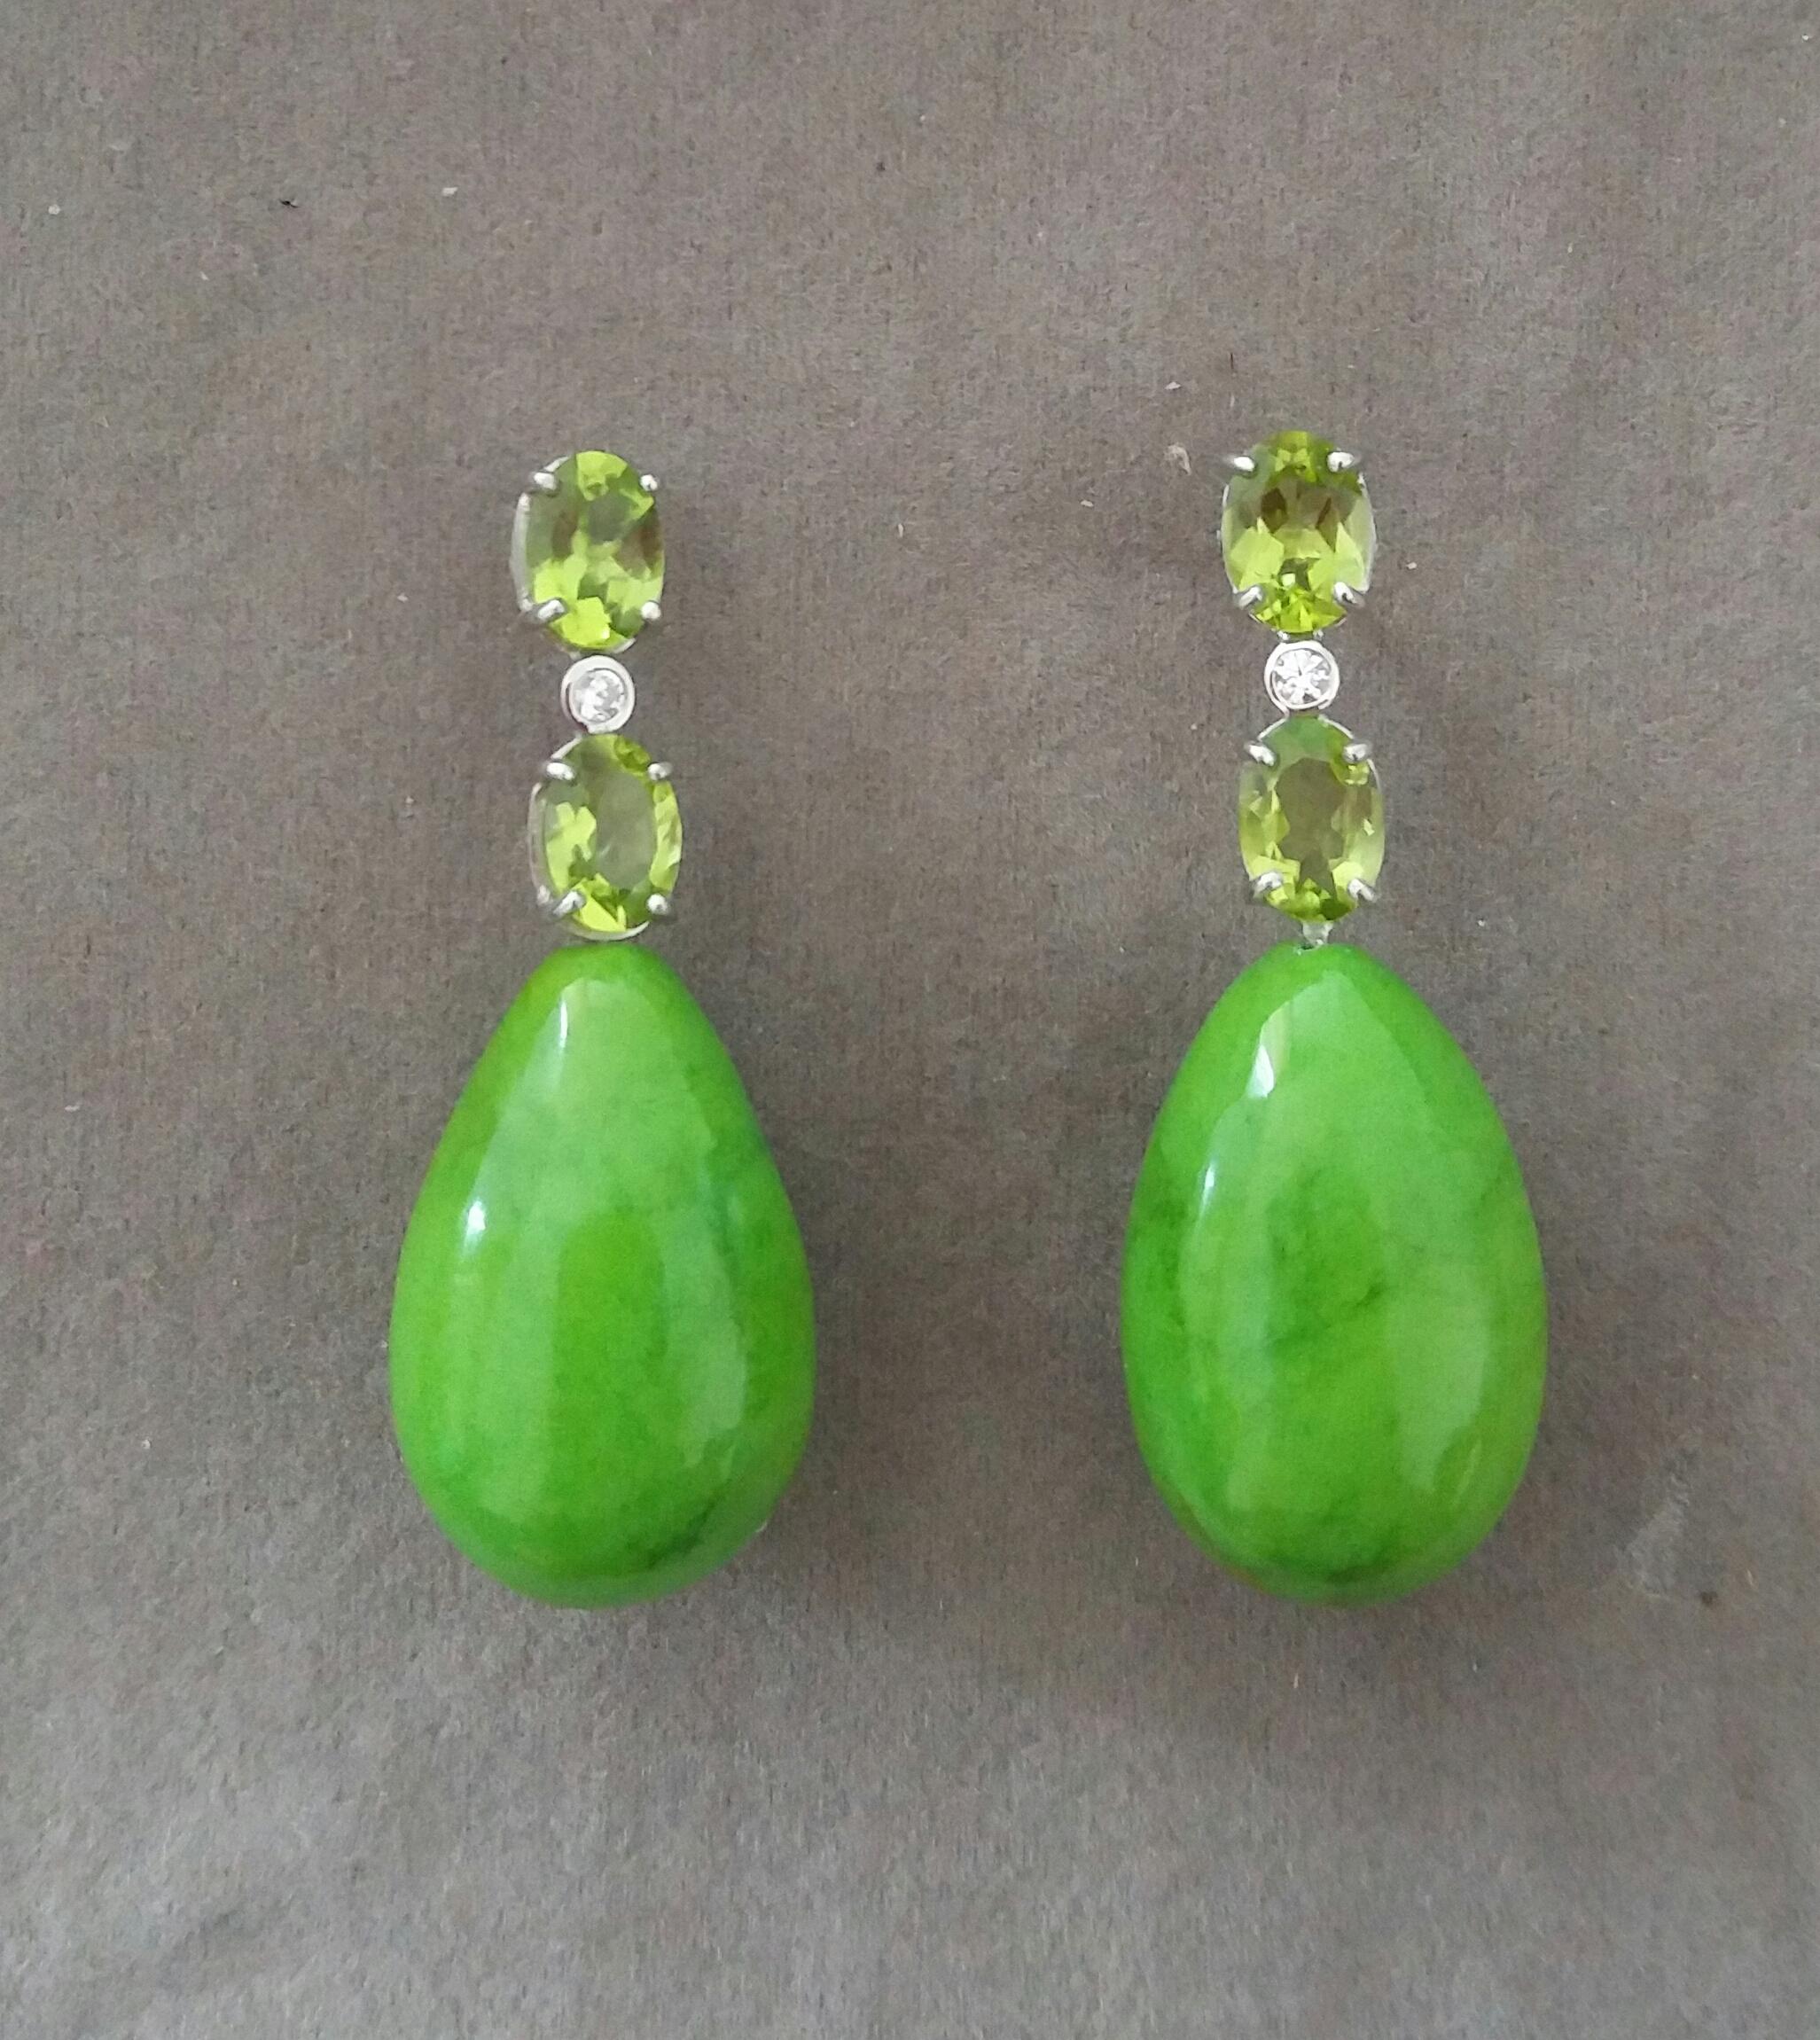 Elegant and completely handmade Earrings consisting of an upper part of 2 oval shape Faceted Peridot of 5 mm x 7 mm set together in 14 Kt white gold with a  small diamond in the middle, at the bottom 2 Green Turkmenistan  Turquoise Plain Round Drops